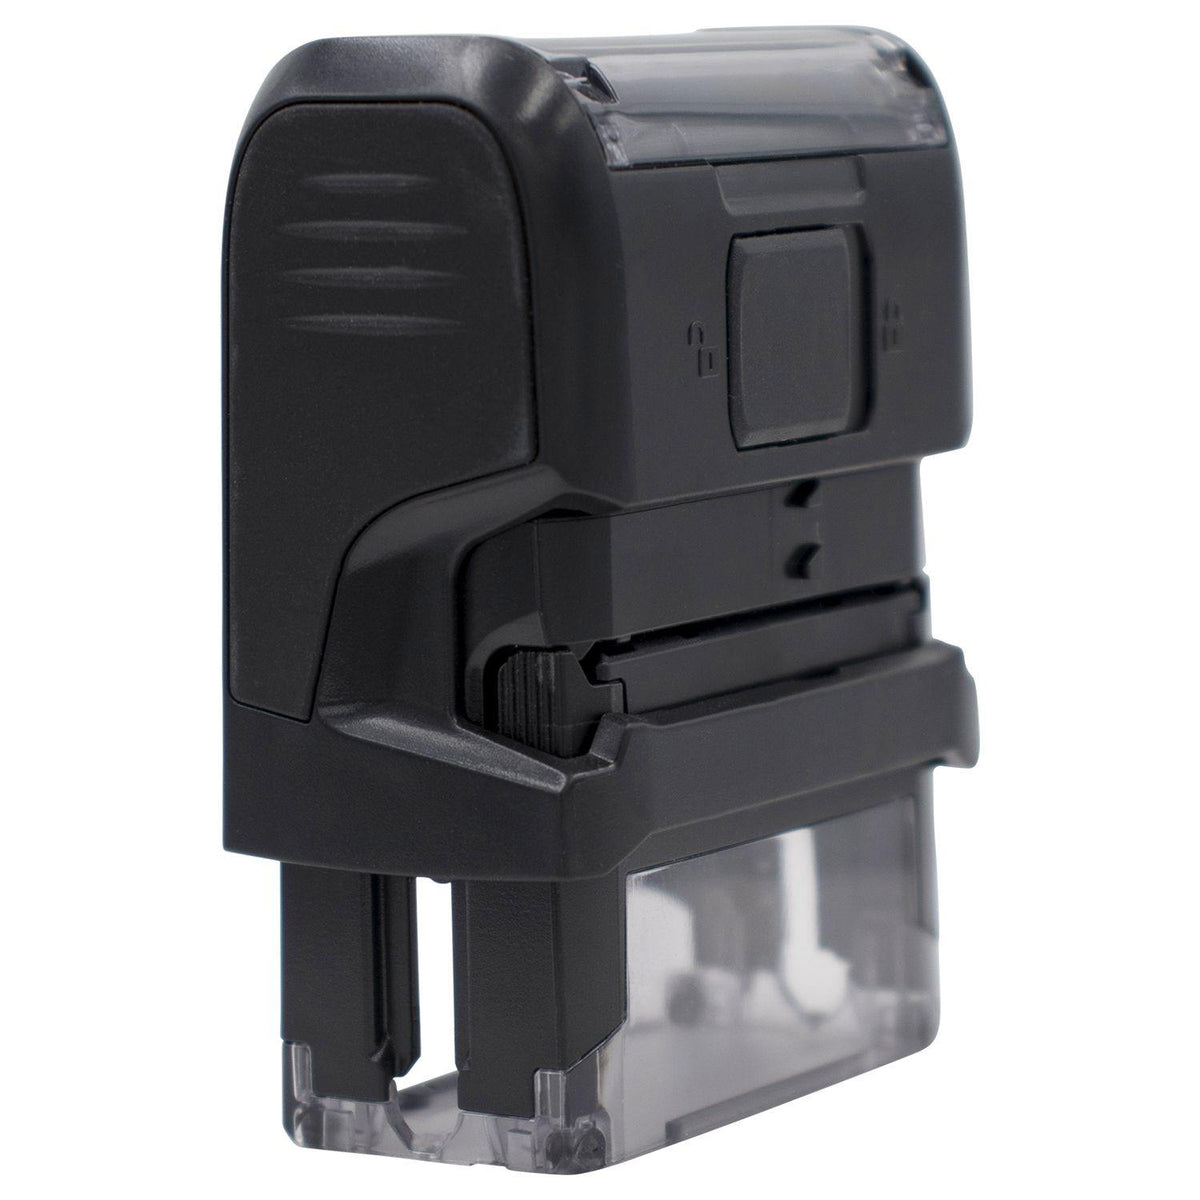 Large Self-Inking Bold Banco Stamp Back View